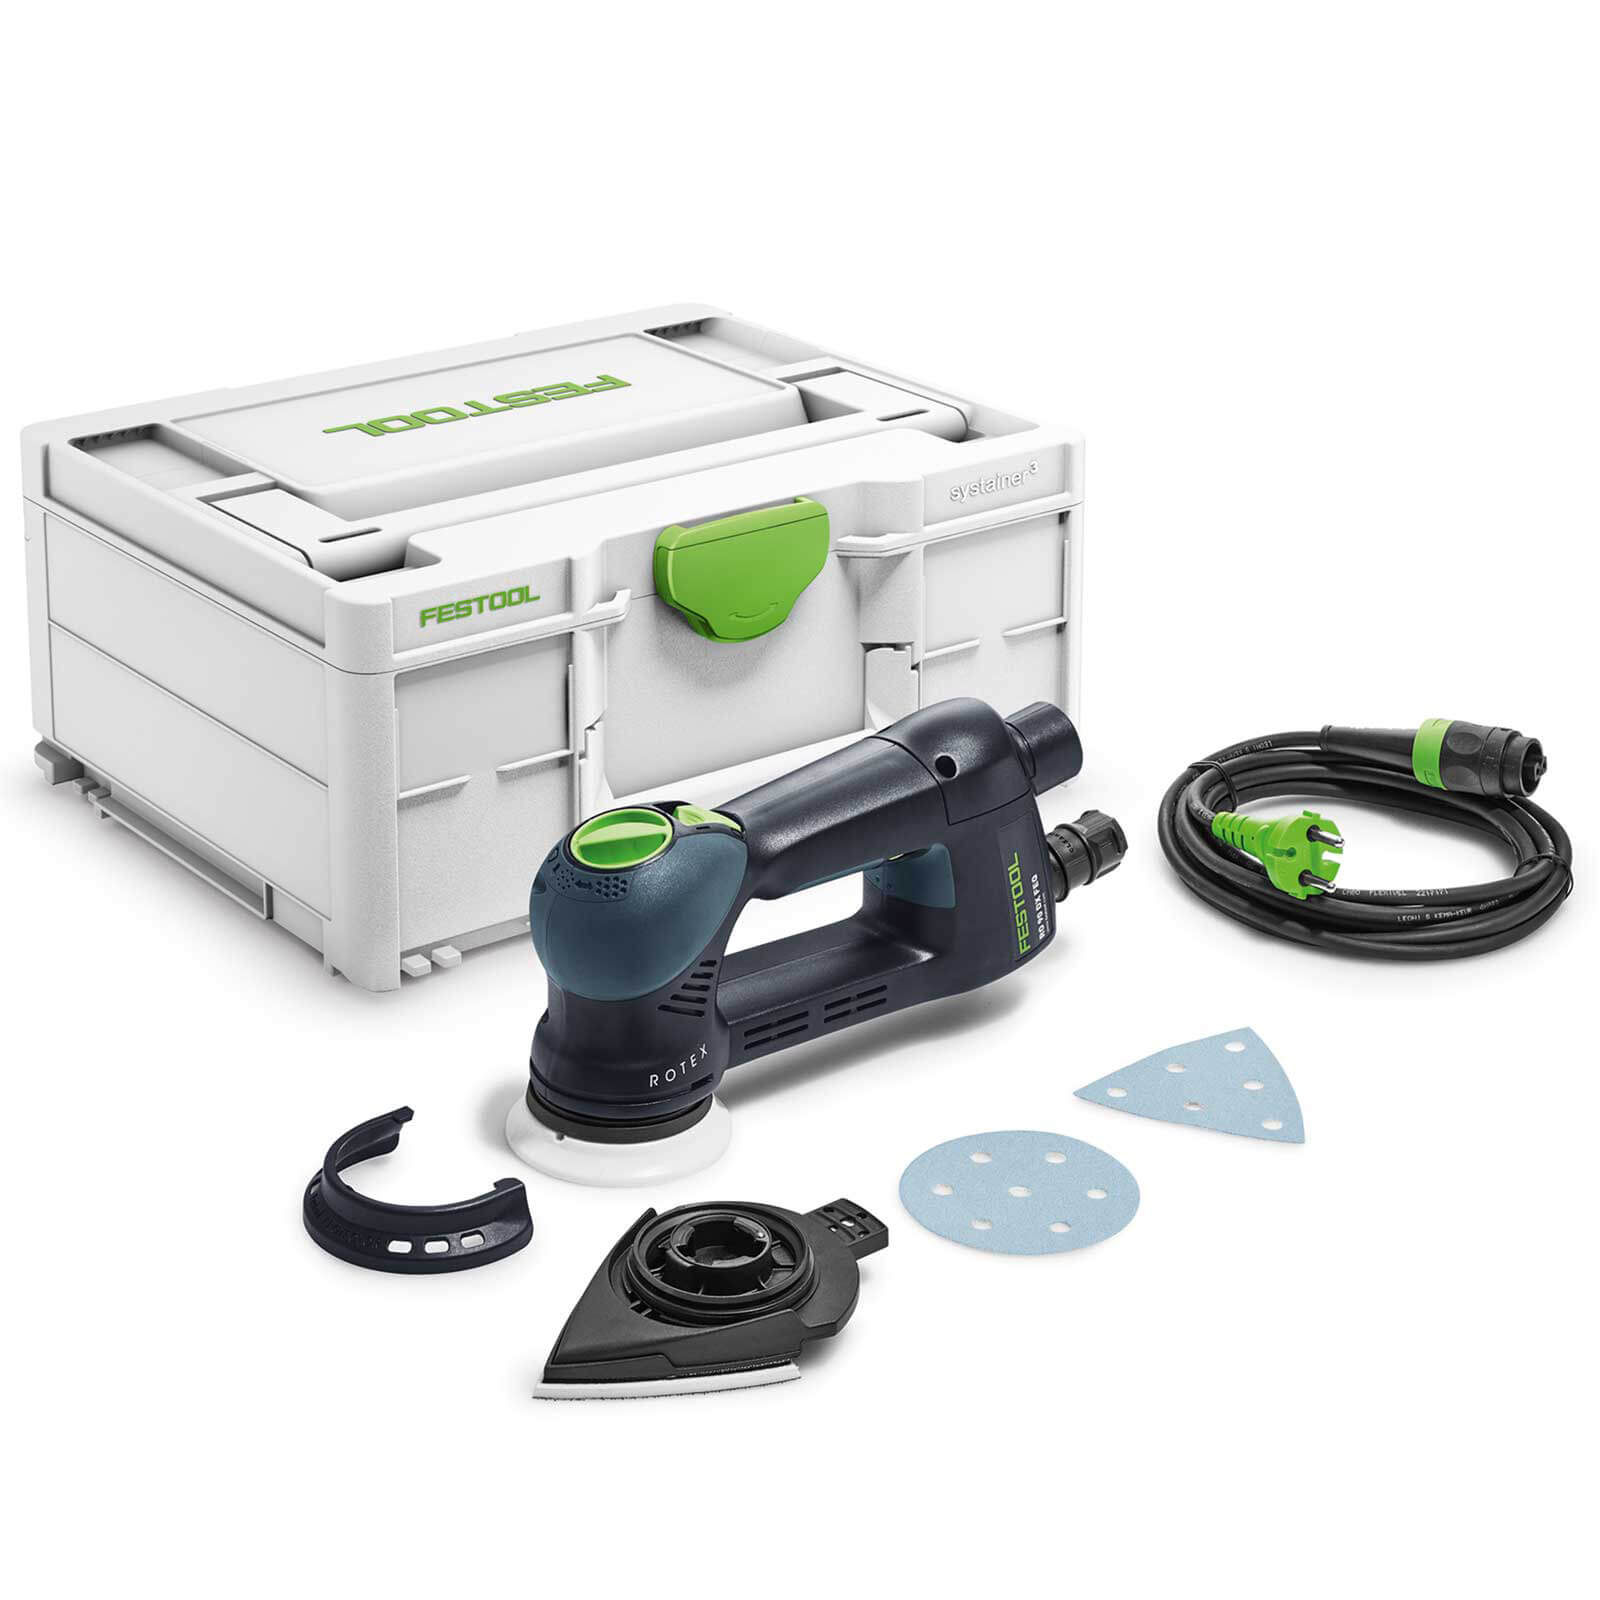 Image of Festool Rotex RO 90 DX FEQ Plus Disc and Delta Sander 90mm 110v